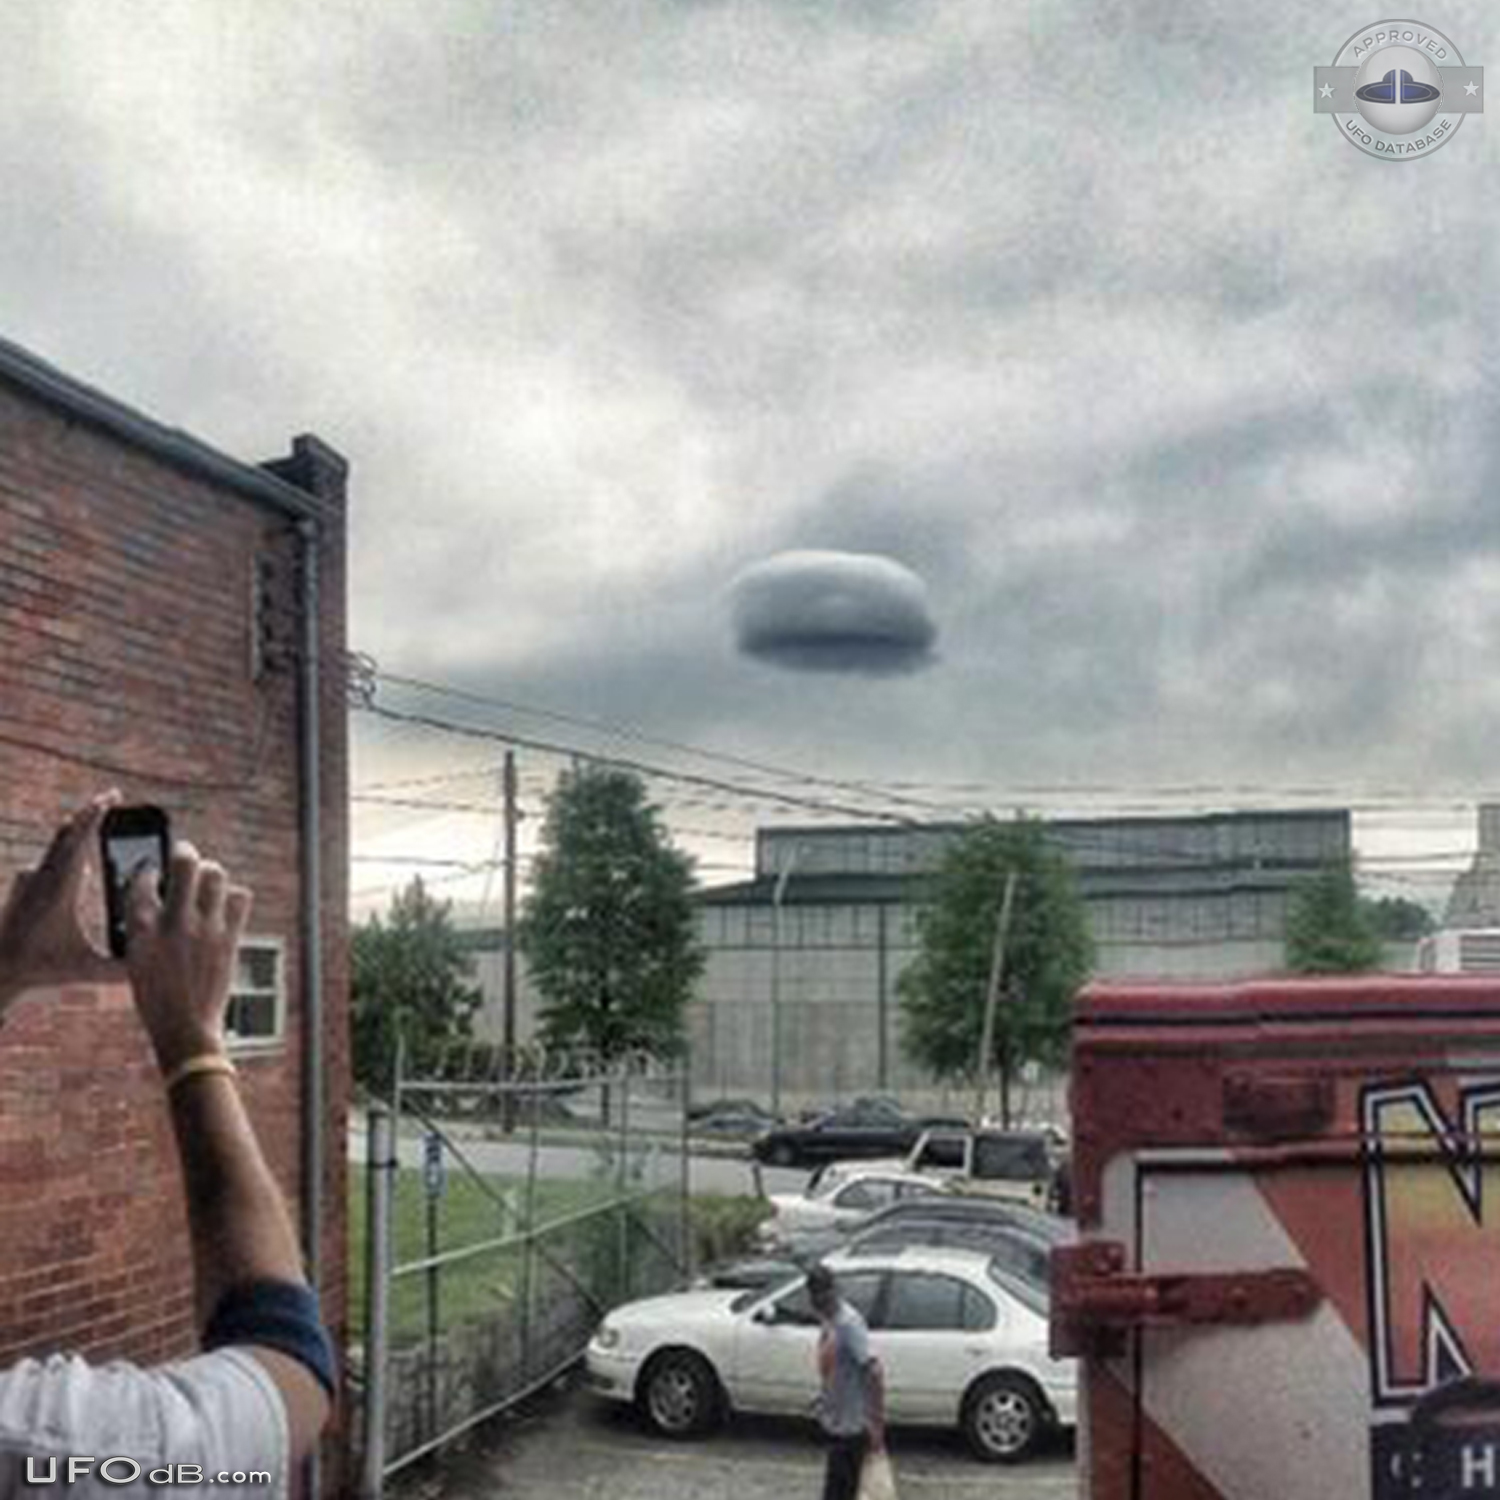 Cloud UFO over Atlanta reported to MUFON by 3 different witnesses 2014 UFO Picture #571-3